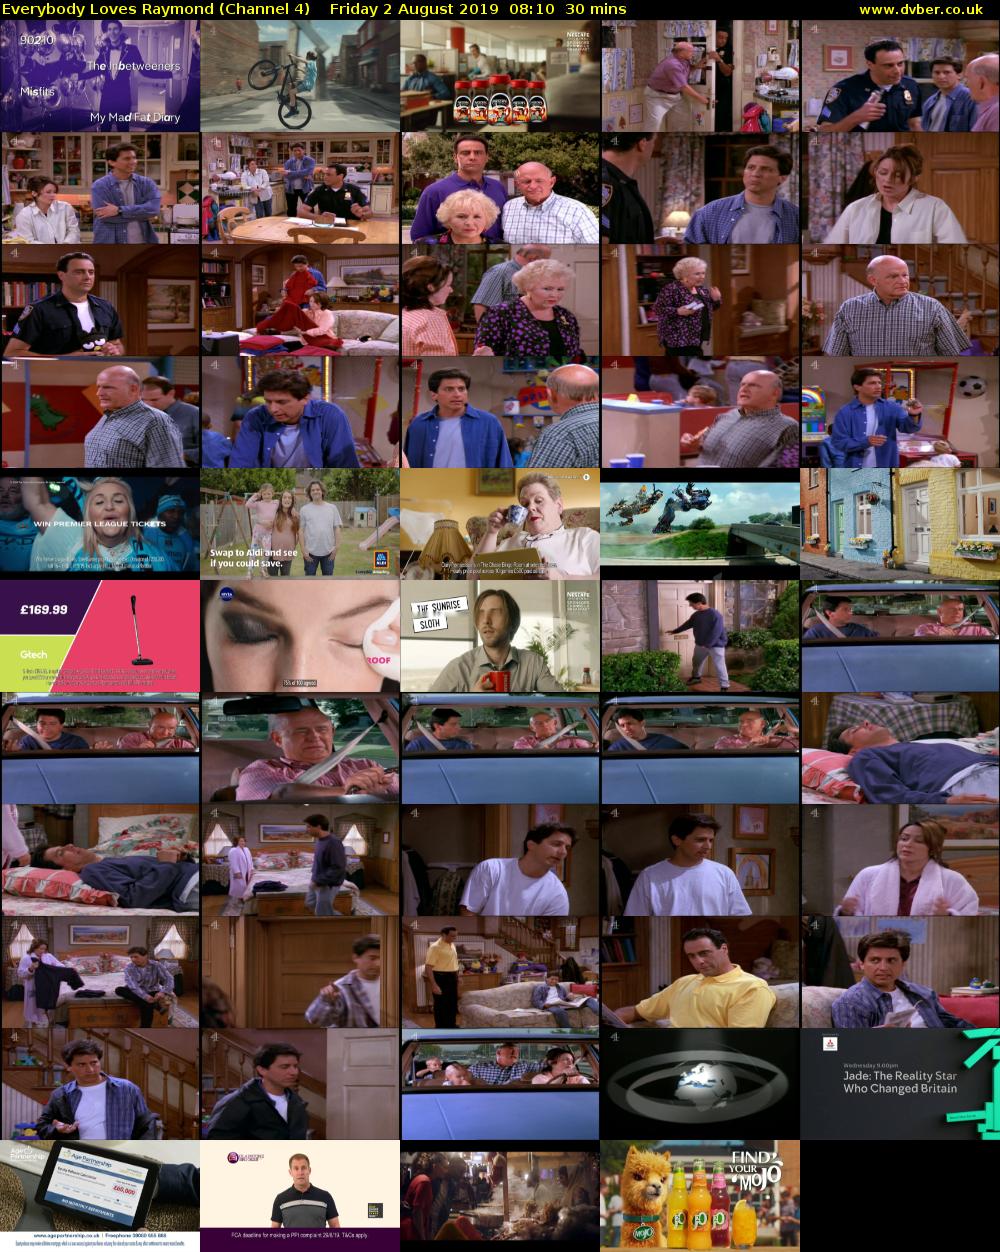 Everybody Loves Raymond (Channel 4) Friday 2 August 2019 08:10 - 08:40